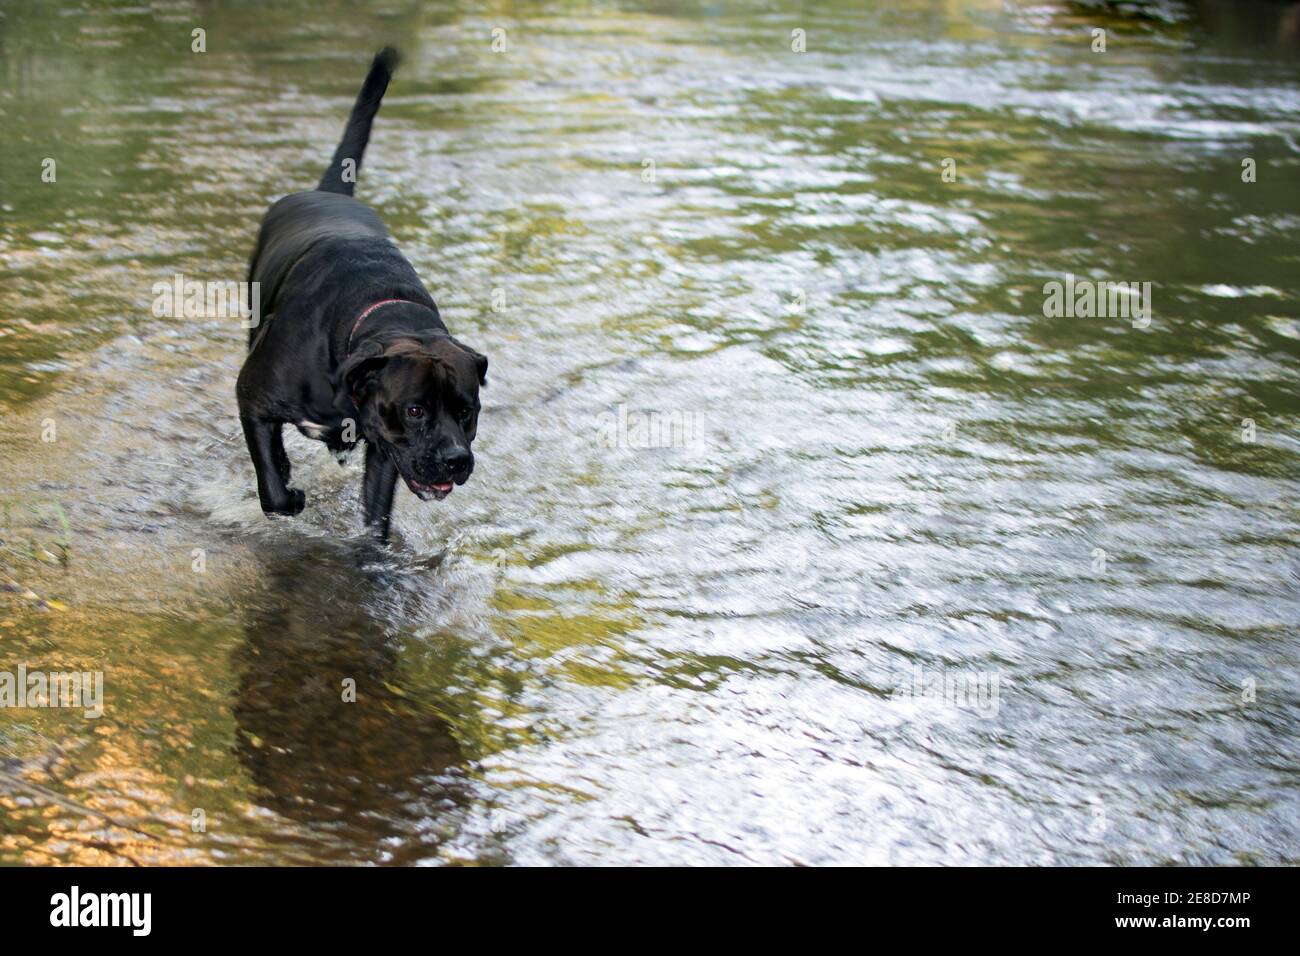 Black lab-cross dog to the left running through a creek with blank area to the right Stock Photo